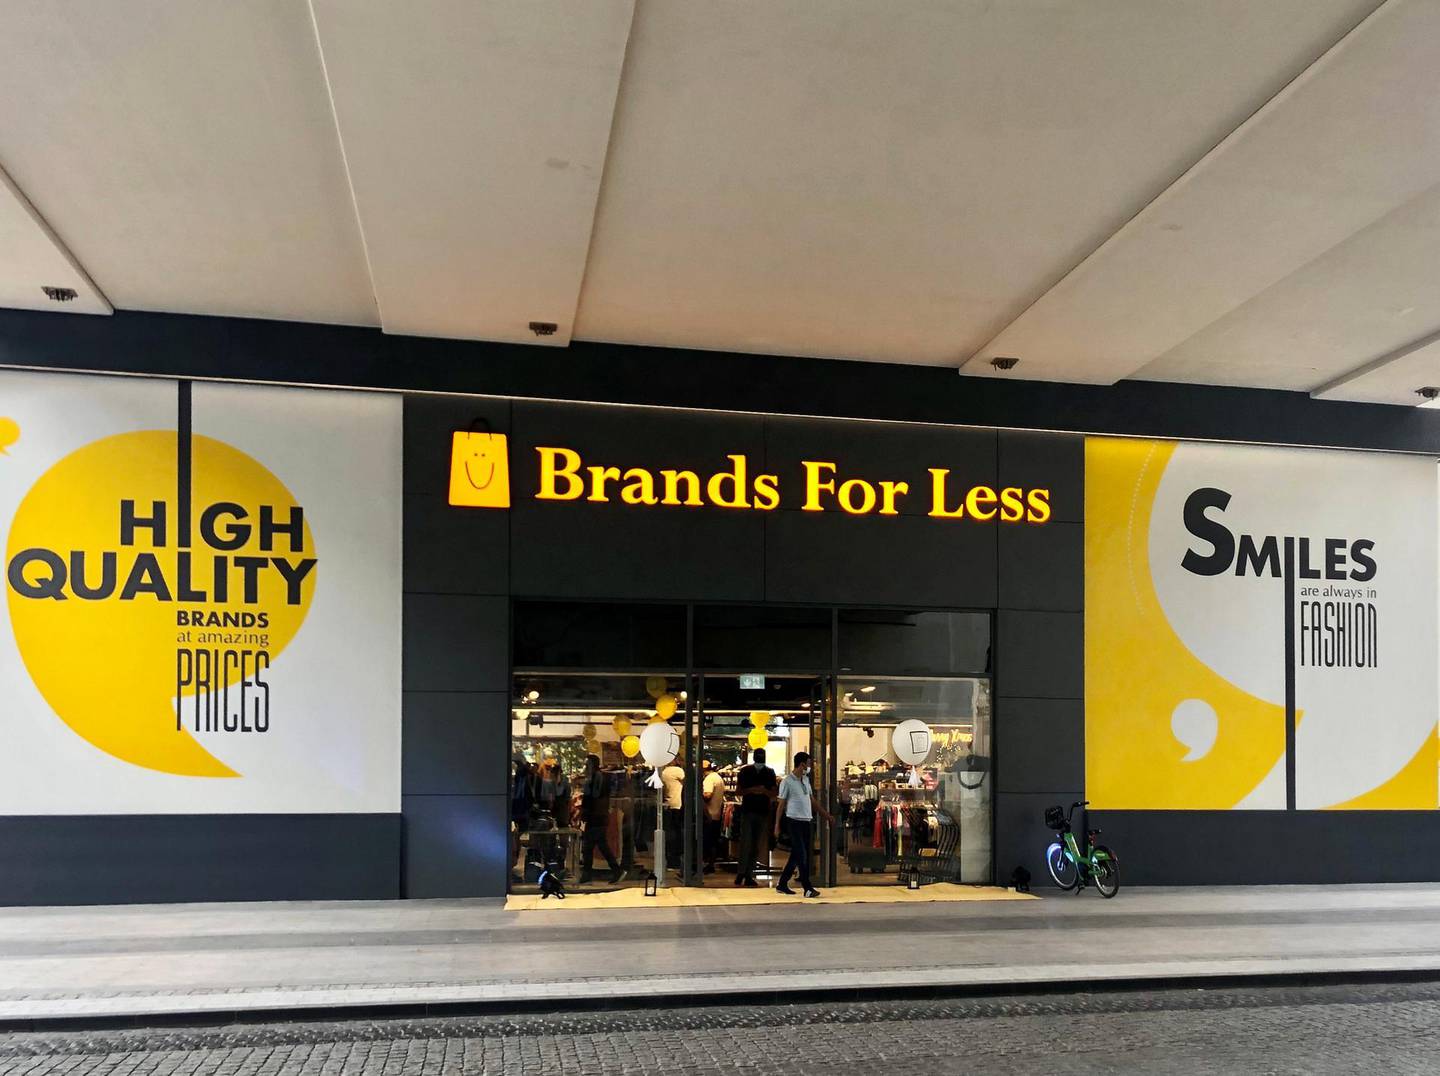 Brands For Less recently unveiled new branches in Dubai, including a first on tourist hotspot Jumeirah Beach Residence, and expanded an existing one. Courtesy Brands for Less